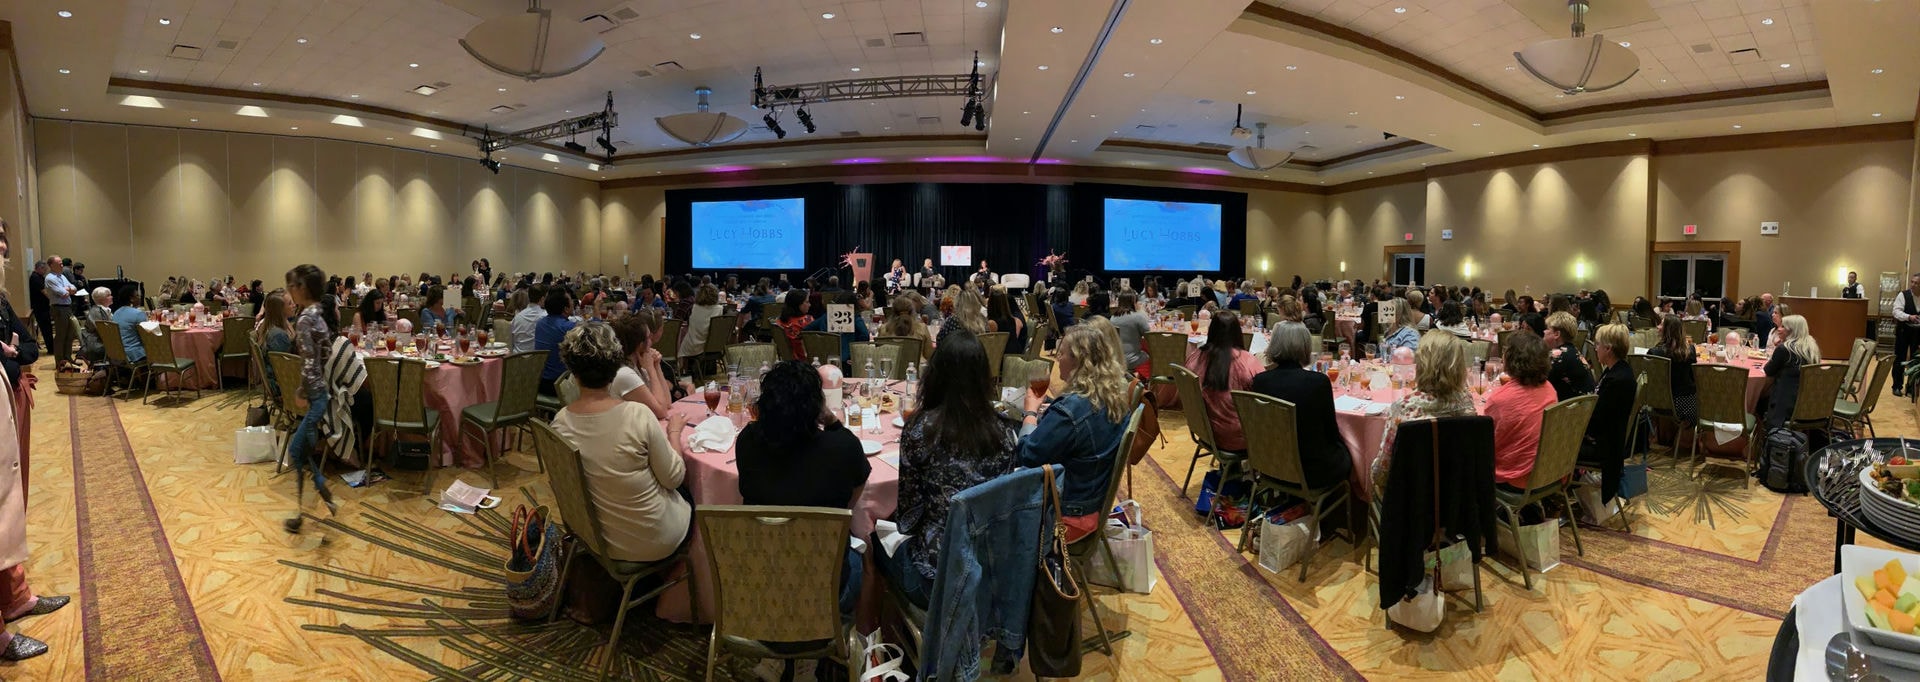 Attendees seated around circular tables at a banquet, watching a presentation.